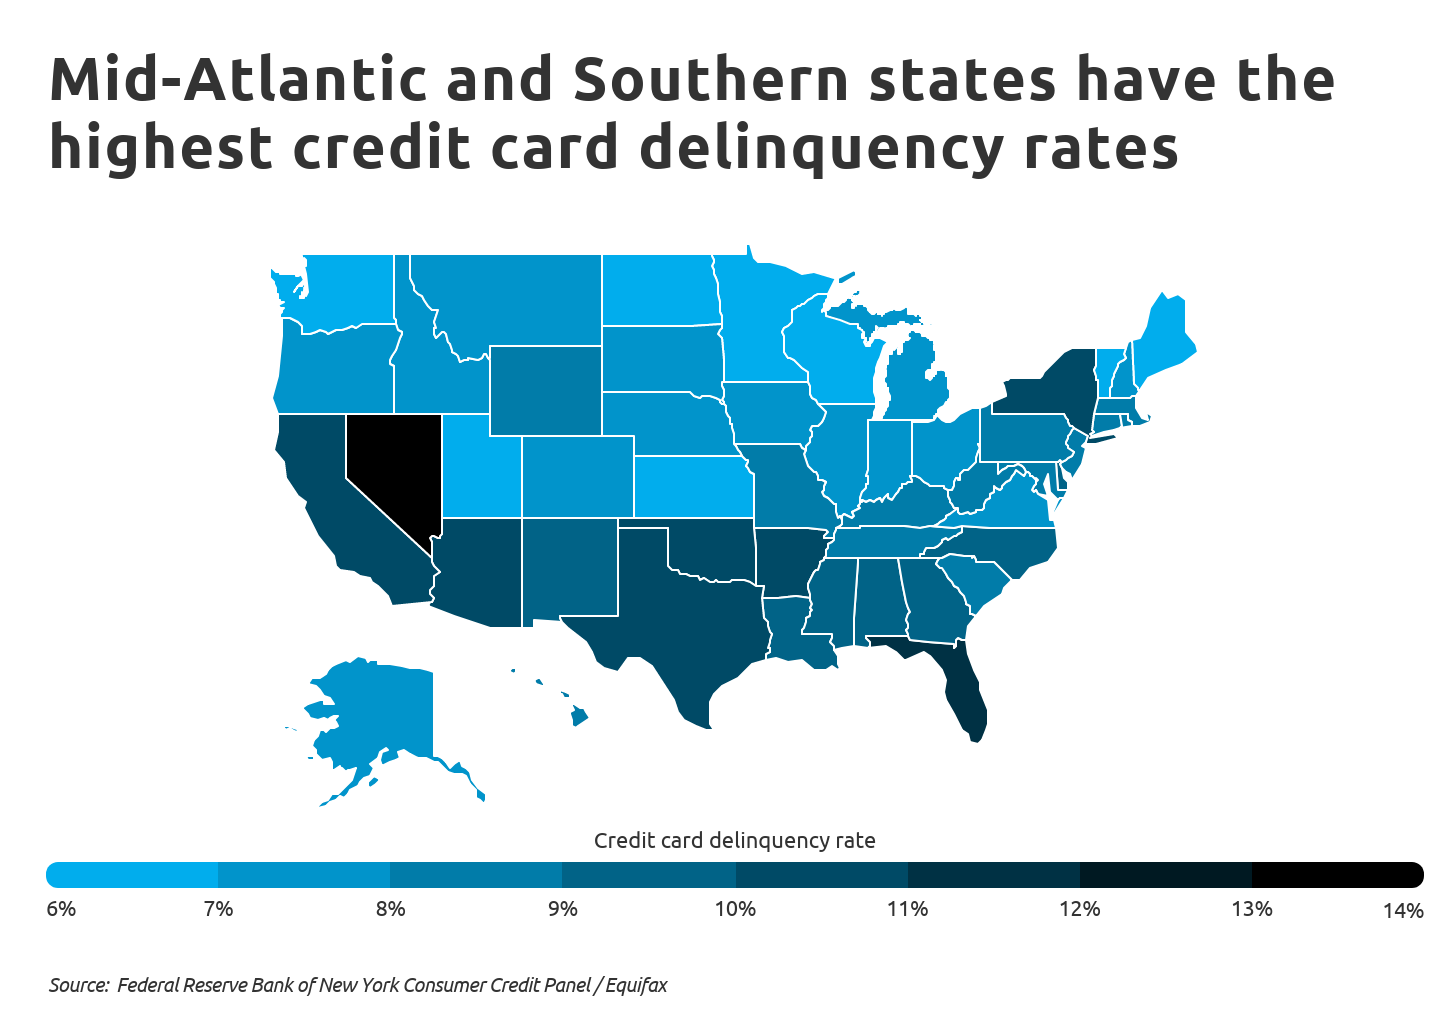 Mid-Atlantic and Southern states have the highest delinquency rates